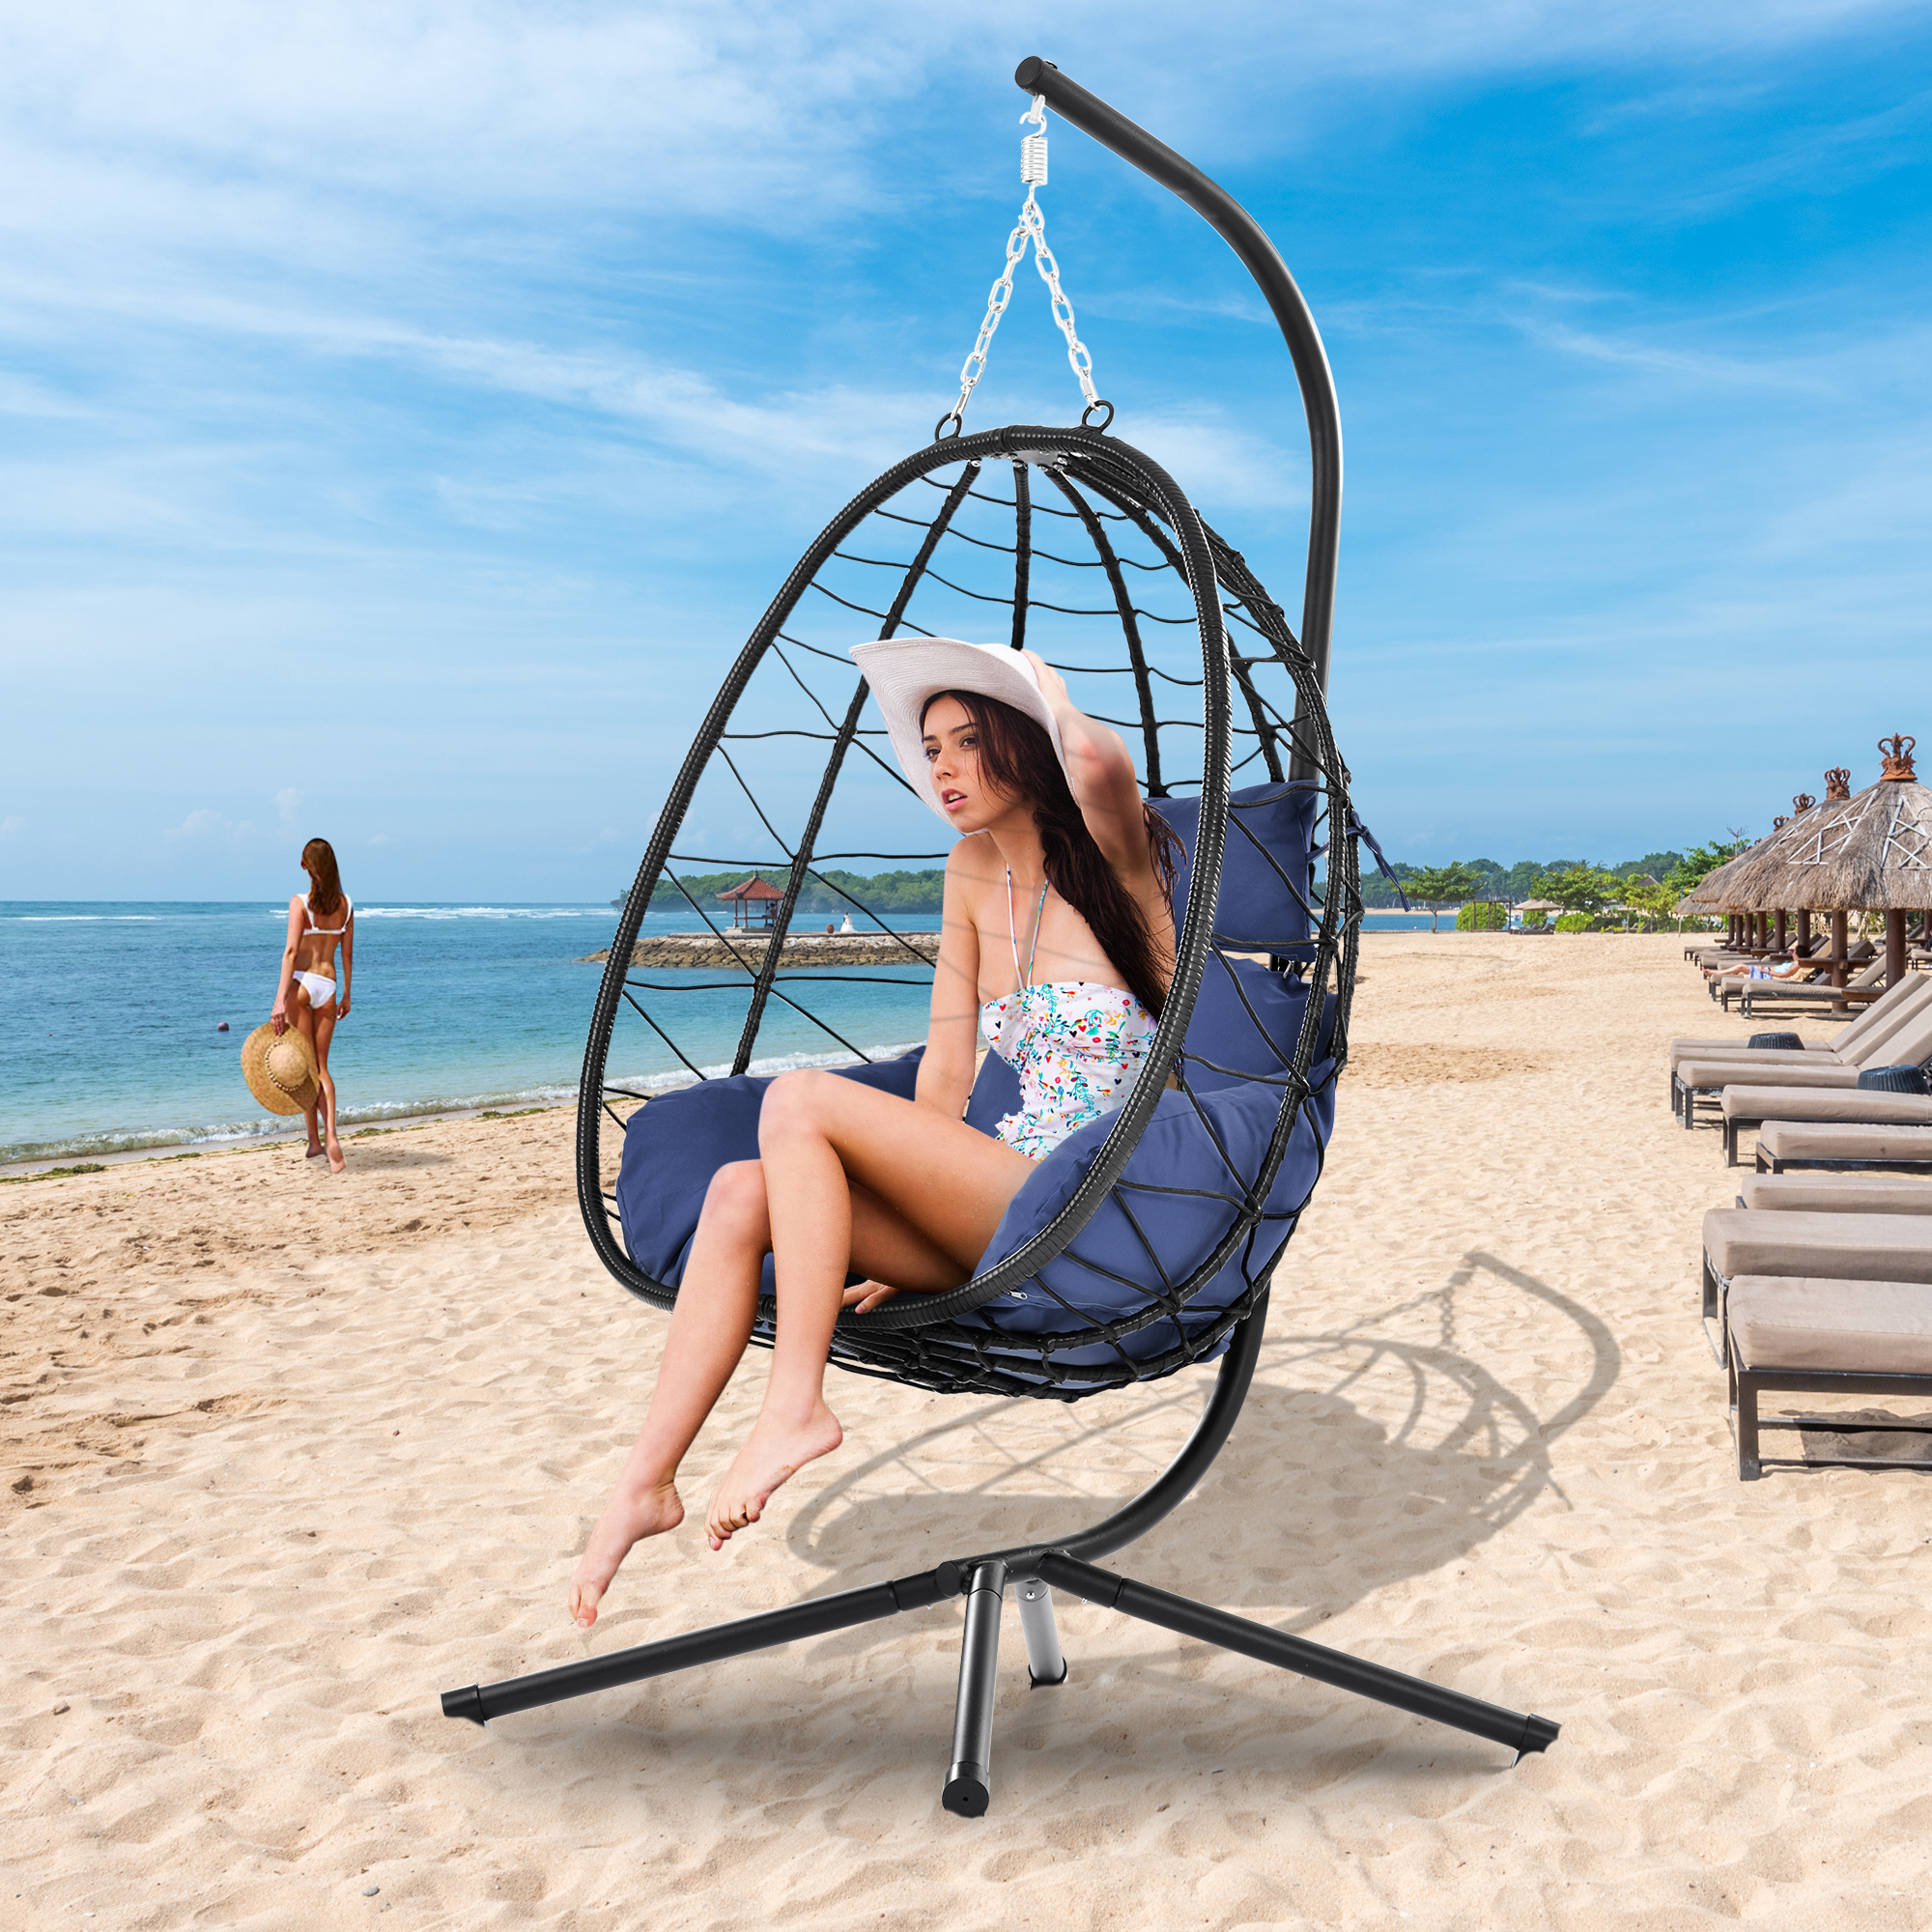 Patio Lounger Egg Chair, Outdoor Hanging Chaise Swing Egg-Shaped Chair w/Hanging Kits, Durable All-Weather UV Wicker Patio Rattan Lounge Chair for Bedroom, Patio, Deck, Yard, Garden, 350lbs, SS1993 - image 2 of 9